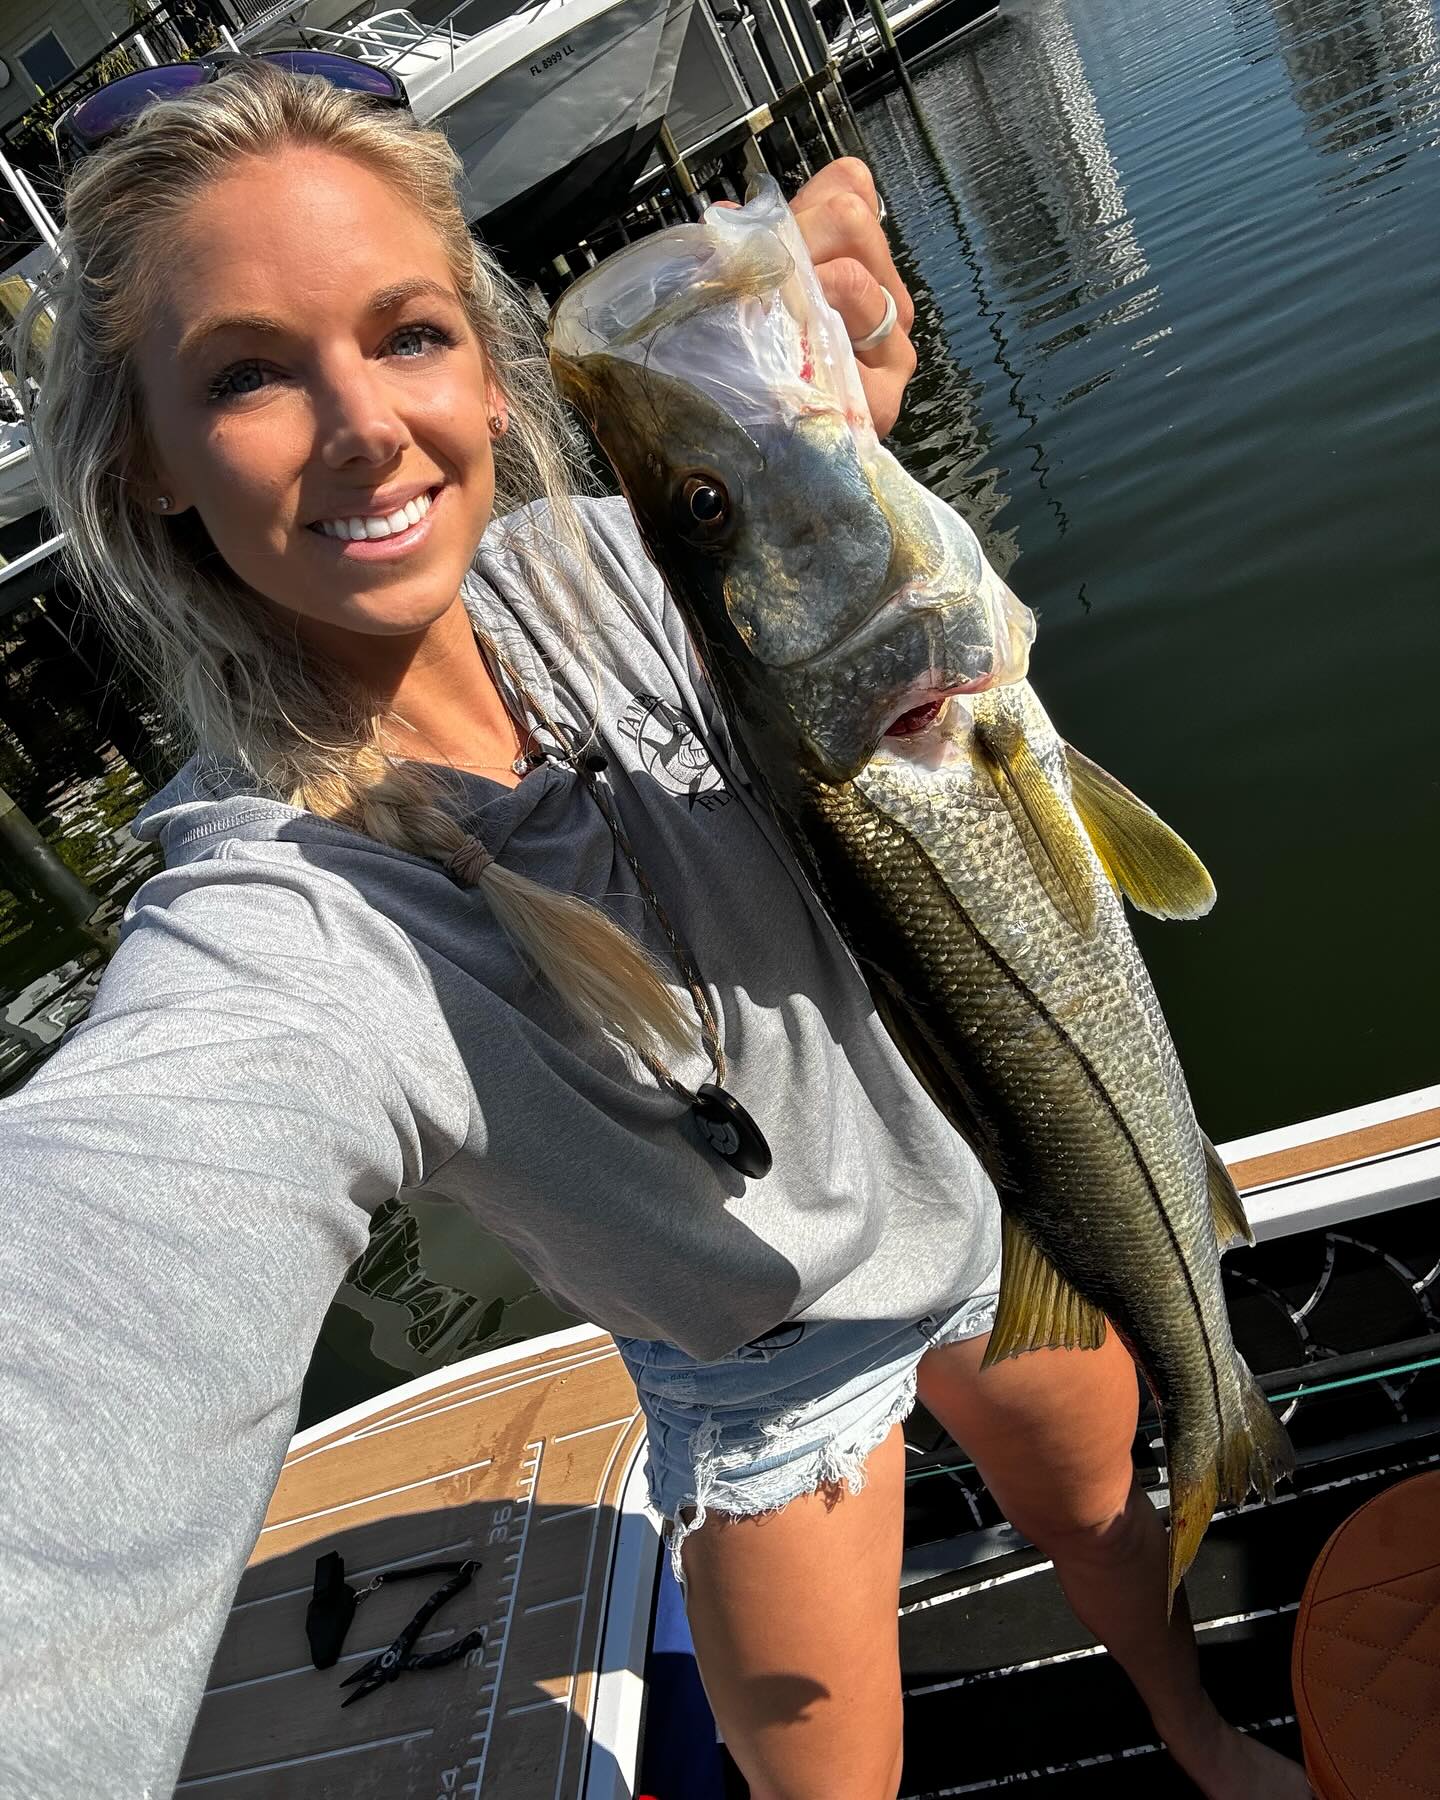 That spring topwater bite is back 😍 water temps are finally heating up 🔥
#inshore #snook #fishing #closecombat #topwater #action